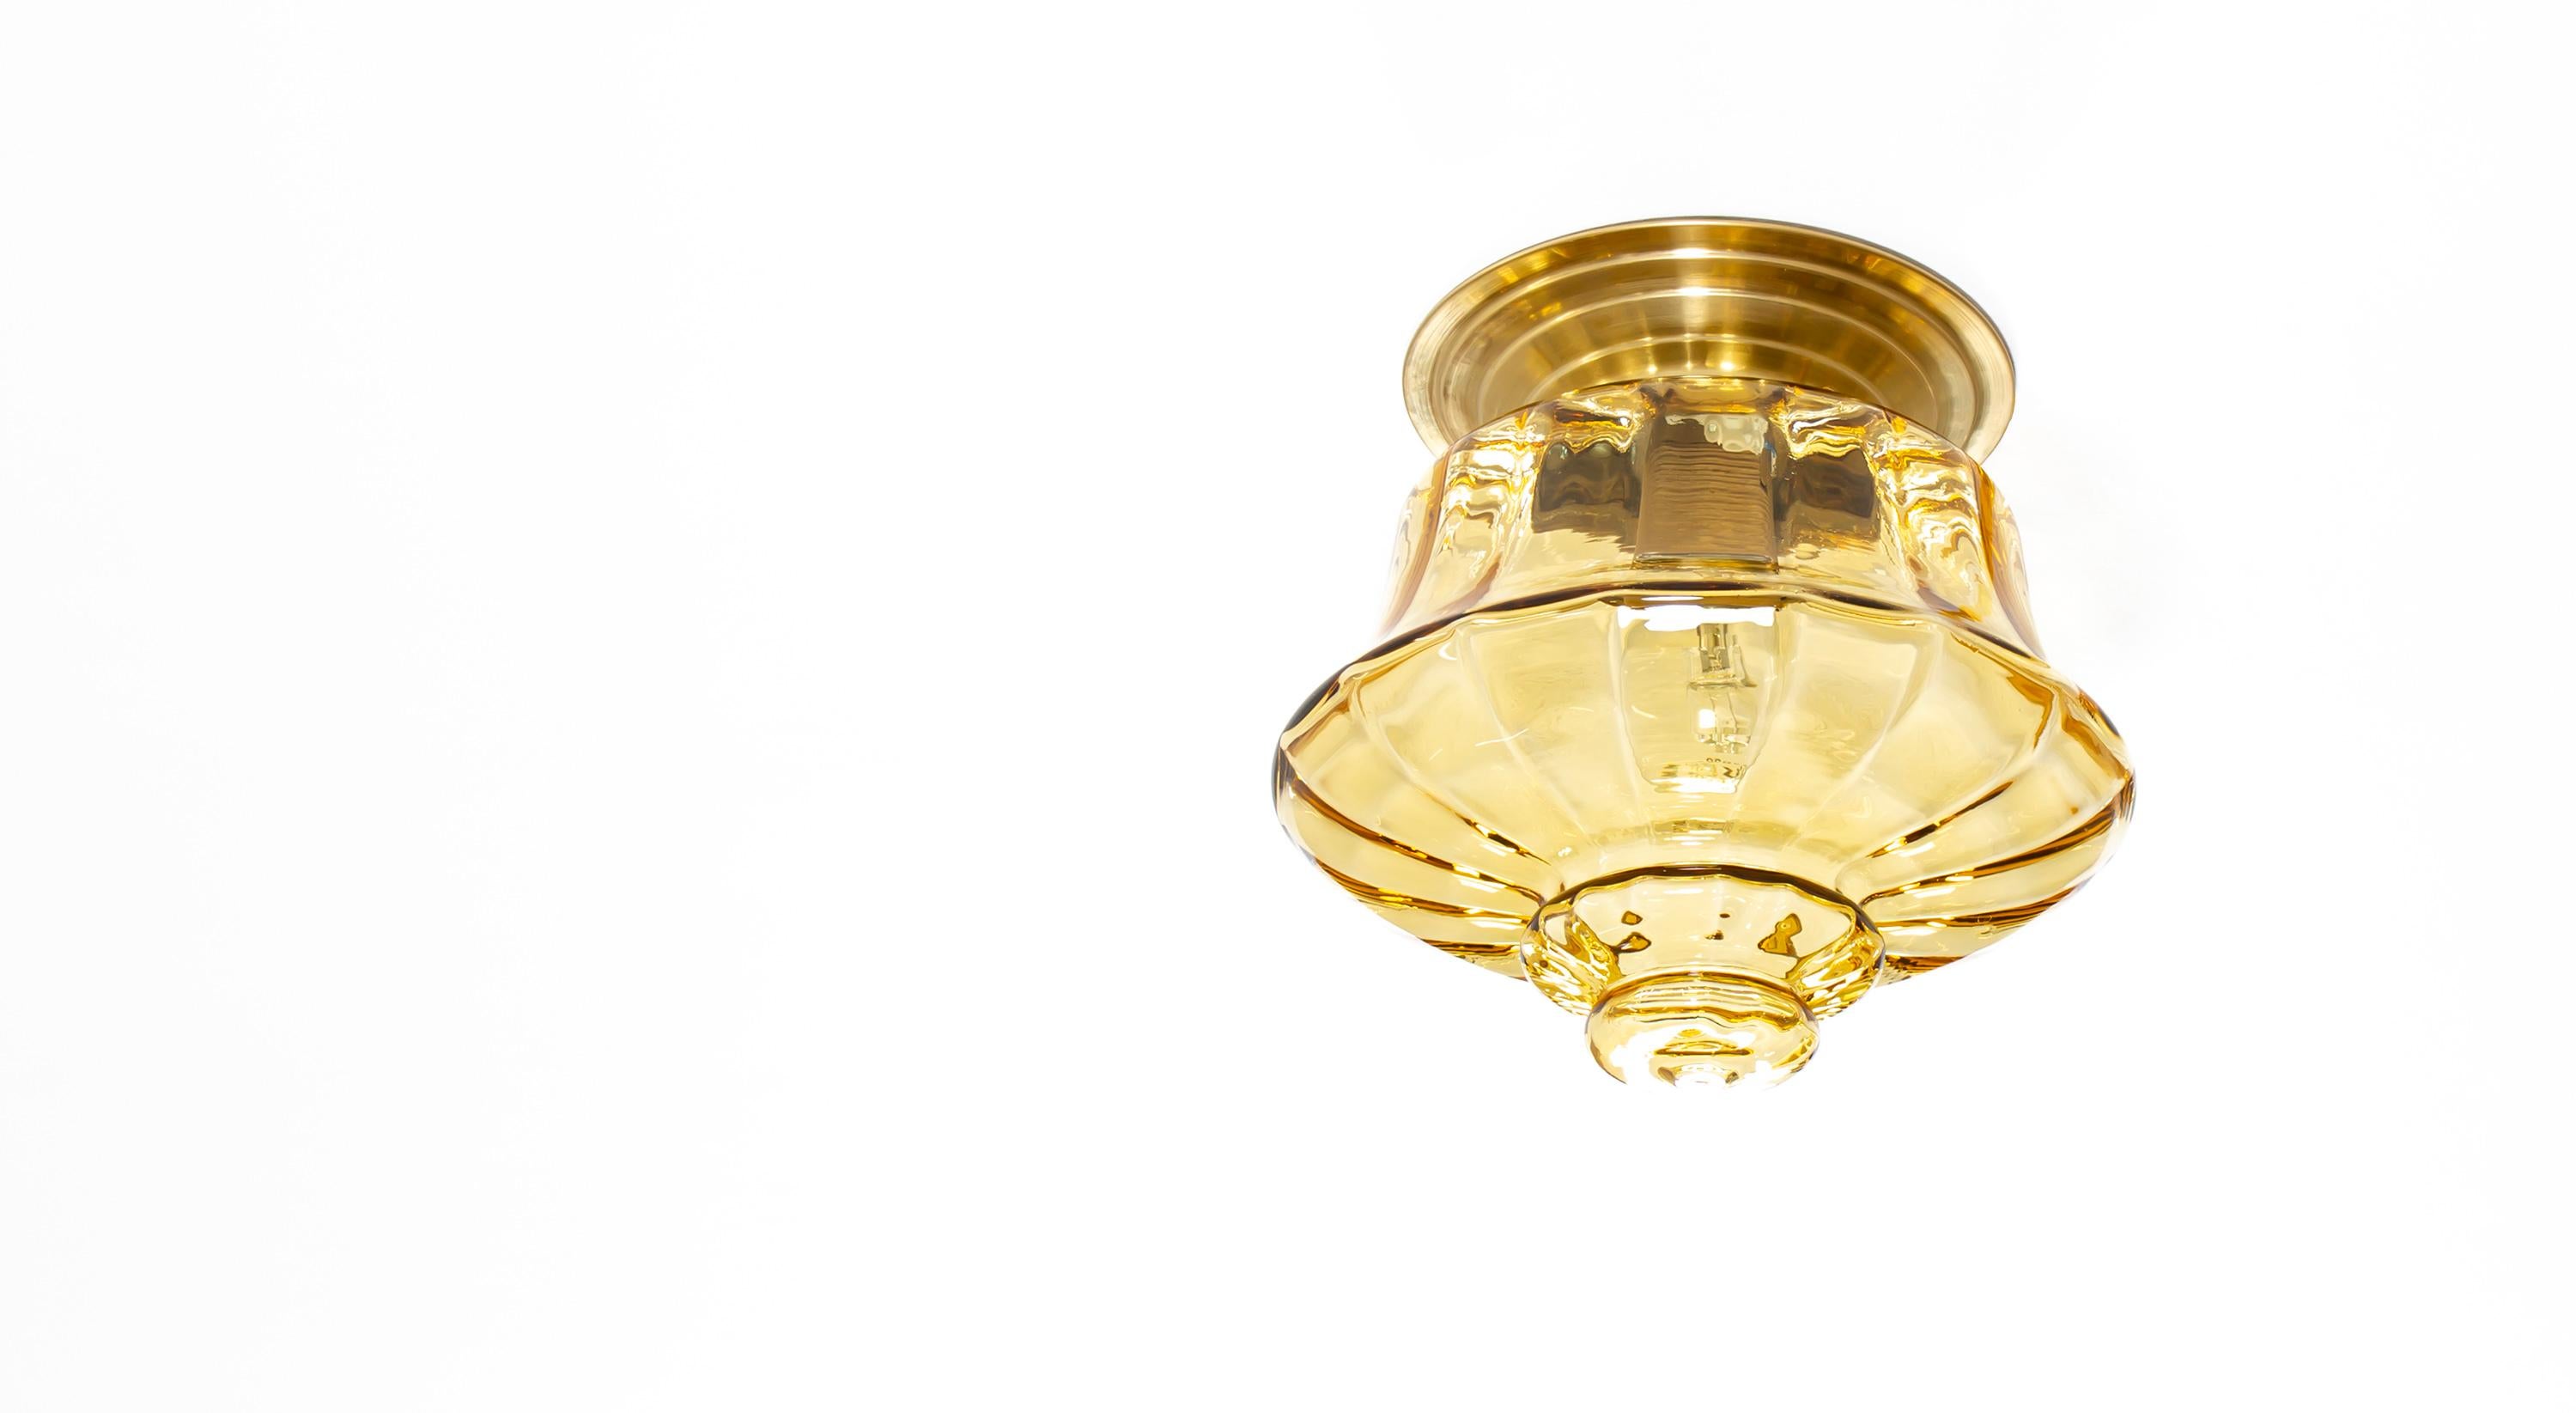 Decorative flush mount ceiling lamp in blown glass with a base in brass. Designed and made in Norway from circa 1970s first half. The lamp is fully working and in good vintage condition. The lamp is fitted with one E27 bulb holder (works in the US)